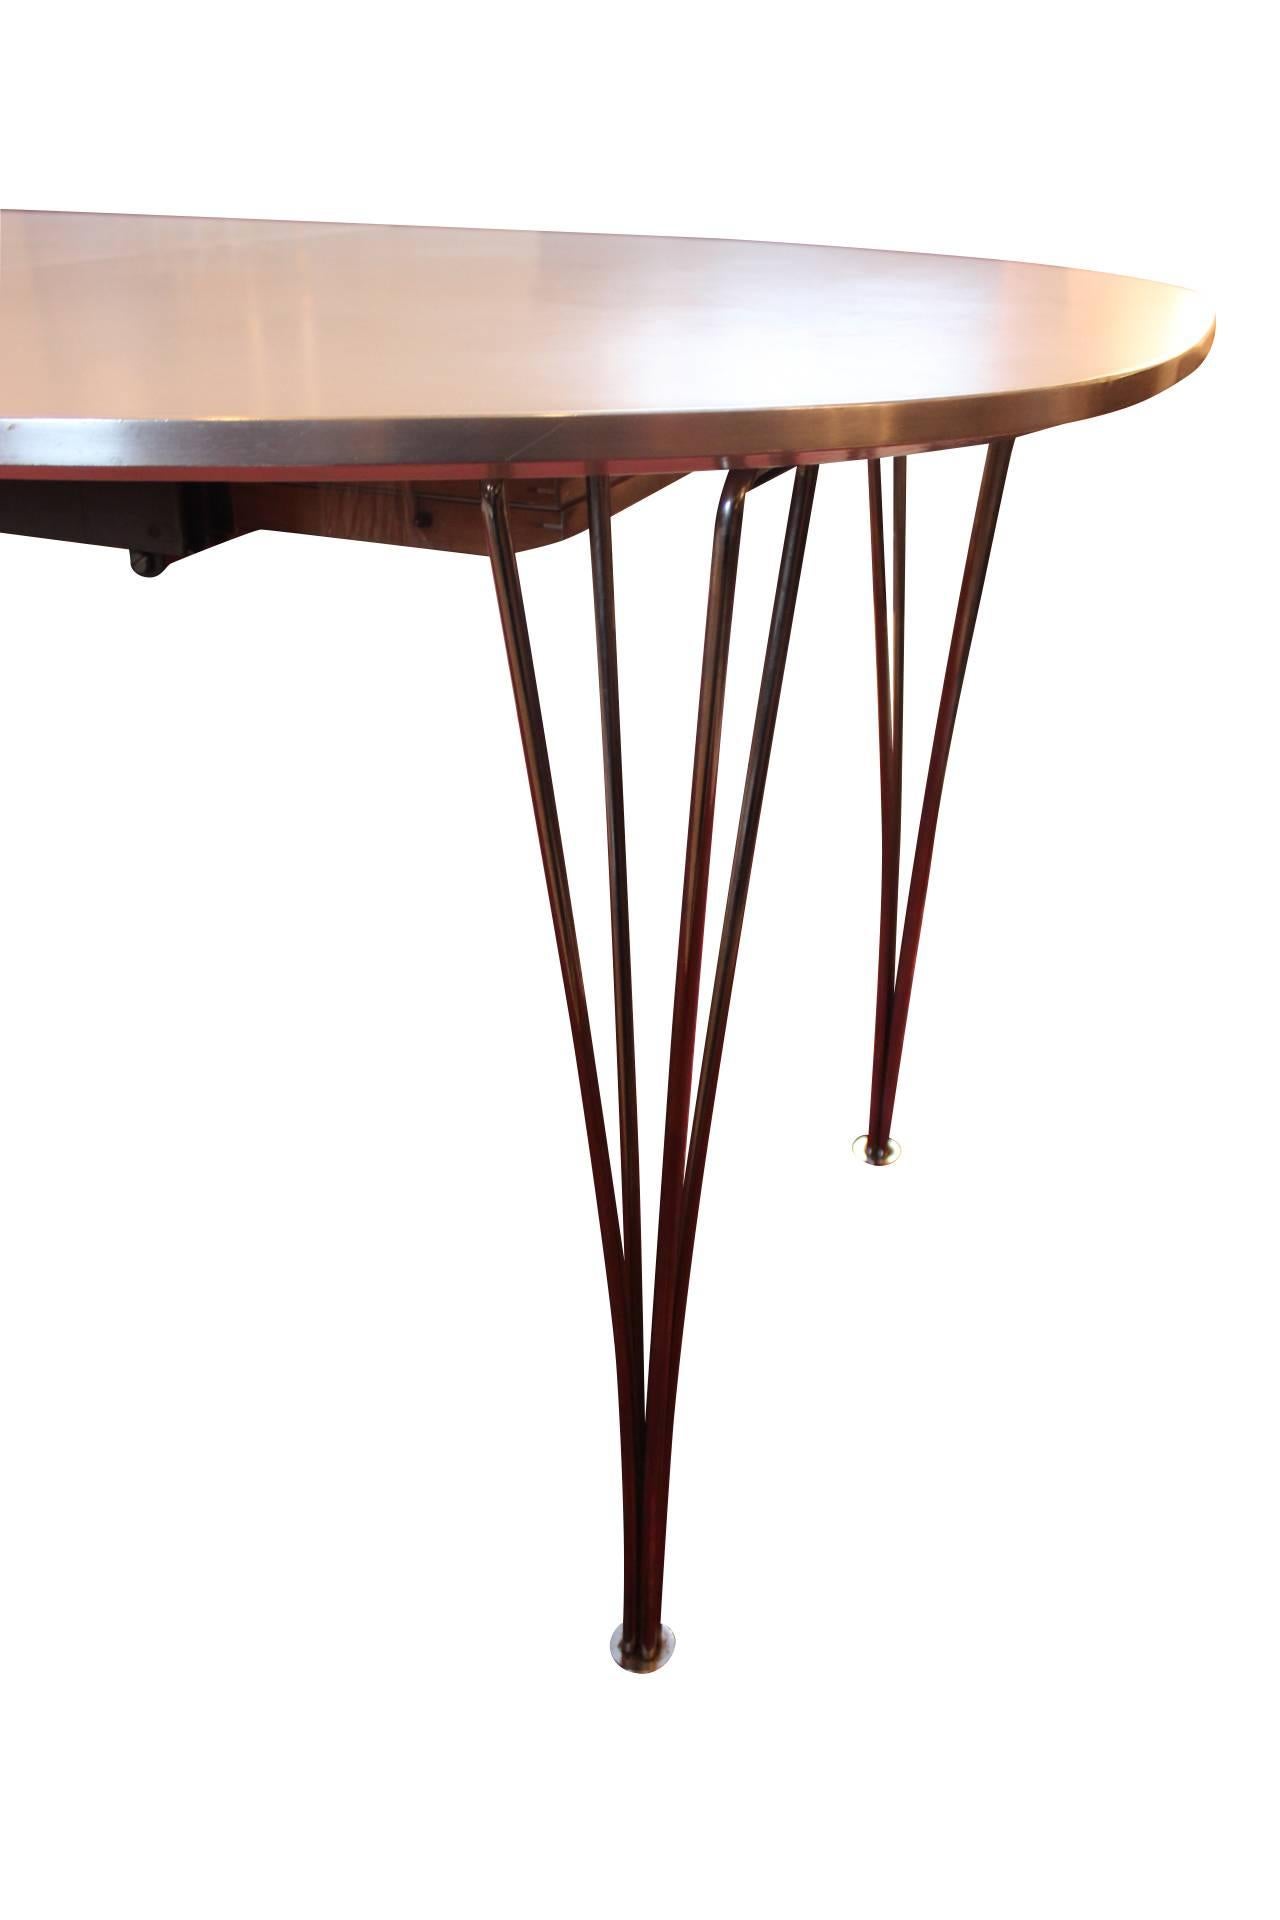 Danish Extension Table, B618, by Piet Hein and Manufactured by Fritz Hansen from 2004 For Sale